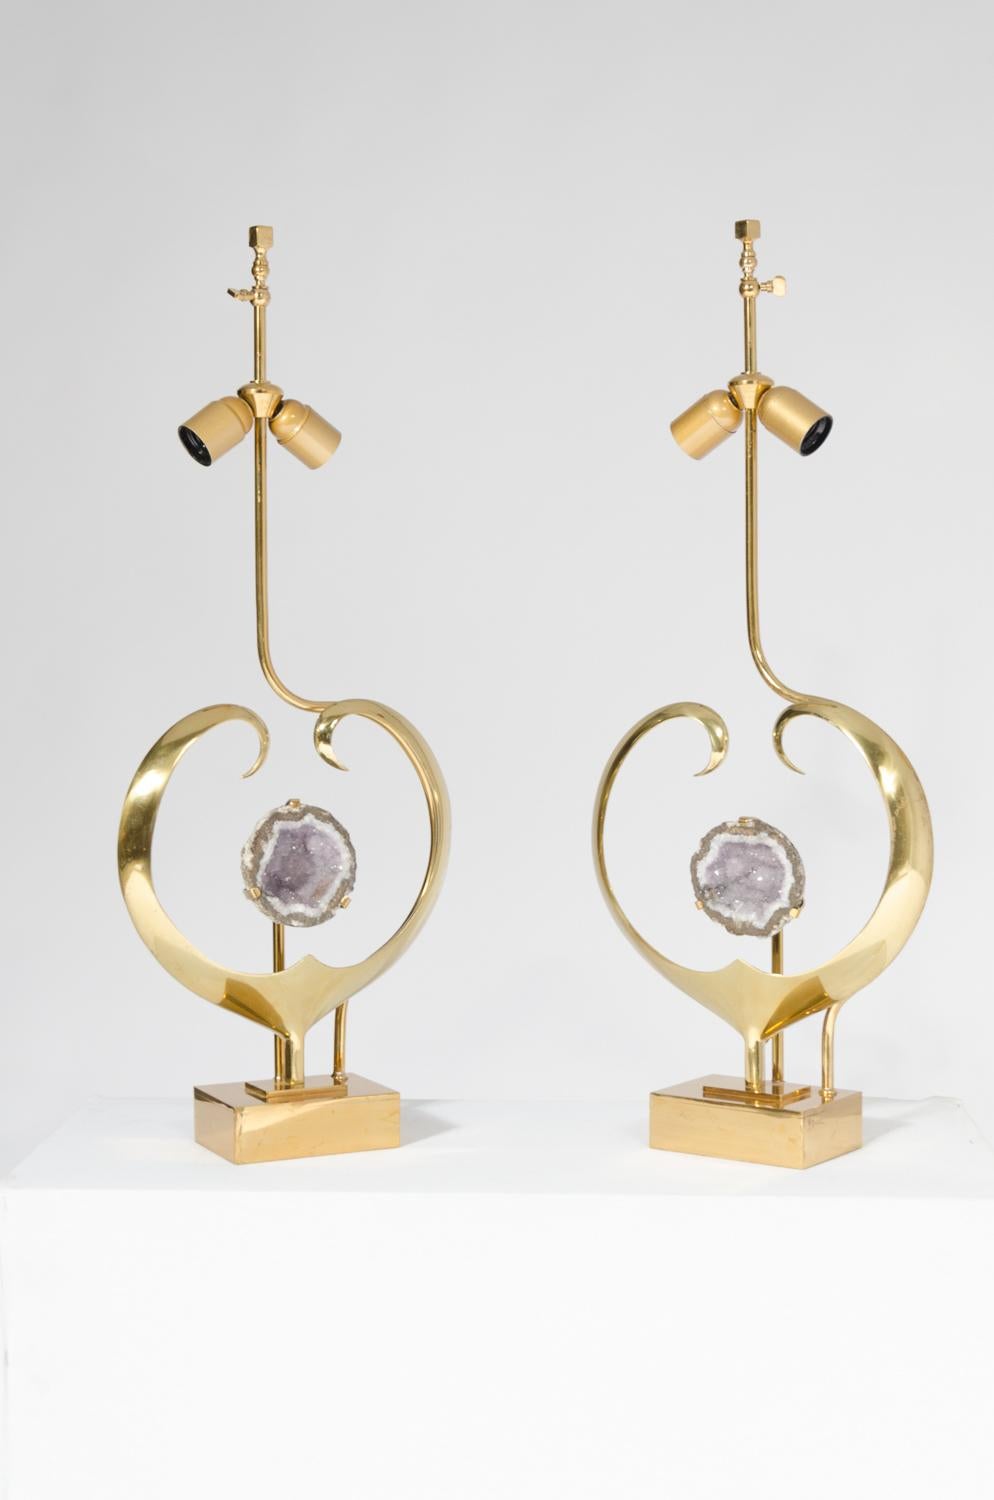 From the 1970s comes this pair of table lamps in sculptural heart brass and amethyst. The lamps received new electric al wires according to the latest safety standards and new polish. Signed by the artist.